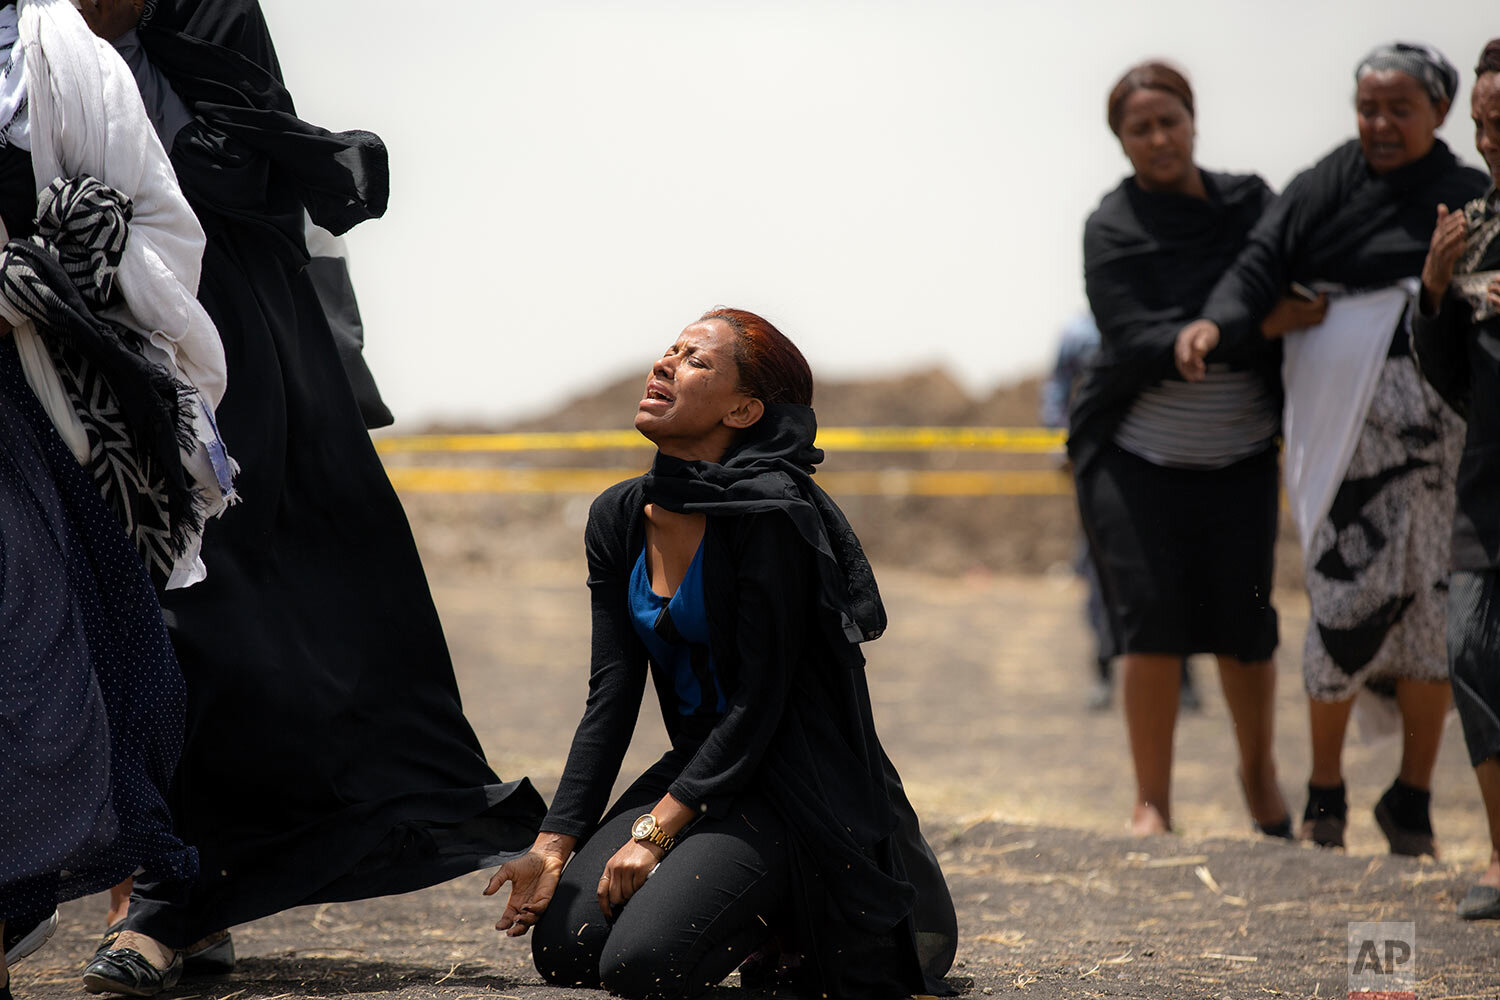  Relatives of crash victims mourn at the scene where the Ethiopian Airlines Boeing 737 Max 8 passenger jet crashed shortly after takeoff, killing all 157 on board, near Bishoftu, Ethiopia, south-east of Addis Ababa, on March 14, 2019. (AP Photo/Mulug